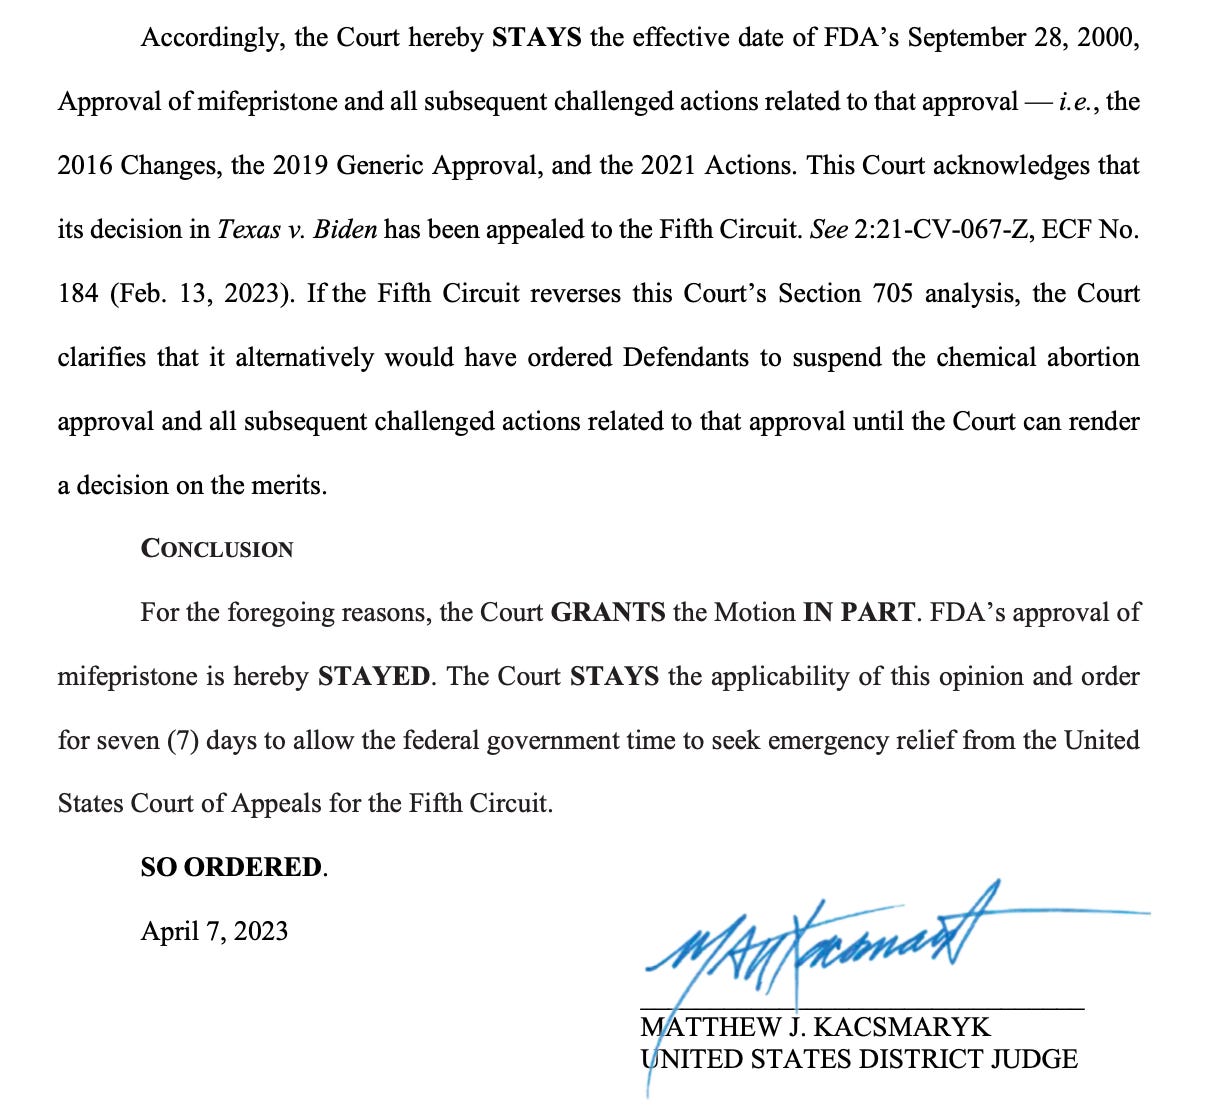 Accordingly, the Court hereby STAYS the effective date of FDA’s September 28, 2000, Approval of mifepristone and all subsequent challenged actions related to that approval — i.e., the 2016 Changes, the 2019 Generic Approval, and the 2021 Actions. This Court acknowledges that its decision in Texas v. Biden has been appealed to the Fifth Circuit. See 2:21-CV-067-Z, ECF No. 184 (Feb. 13, 2023). If the Fifth Circuit reverses this Court’s Section 705 analysis, the Court clarifies that it alternatively would have ordered Defendants to suspend the chemical abortion approval and all subsequent challenged actions related to that approval until the Court can render a decision on the merits. CONCLUSION For the foregoing reasons, the Court GRANTS the Motion IN PART. FDA’s approval of mifepristone is hereby STAYED. The Court STAYS the applicability of this opinion and order for seven (7) days to allow the federal government time to seek emergency relief from the United States Court of Appeals for the Fifth Circuit. SO ORDERED. April 7, 2023